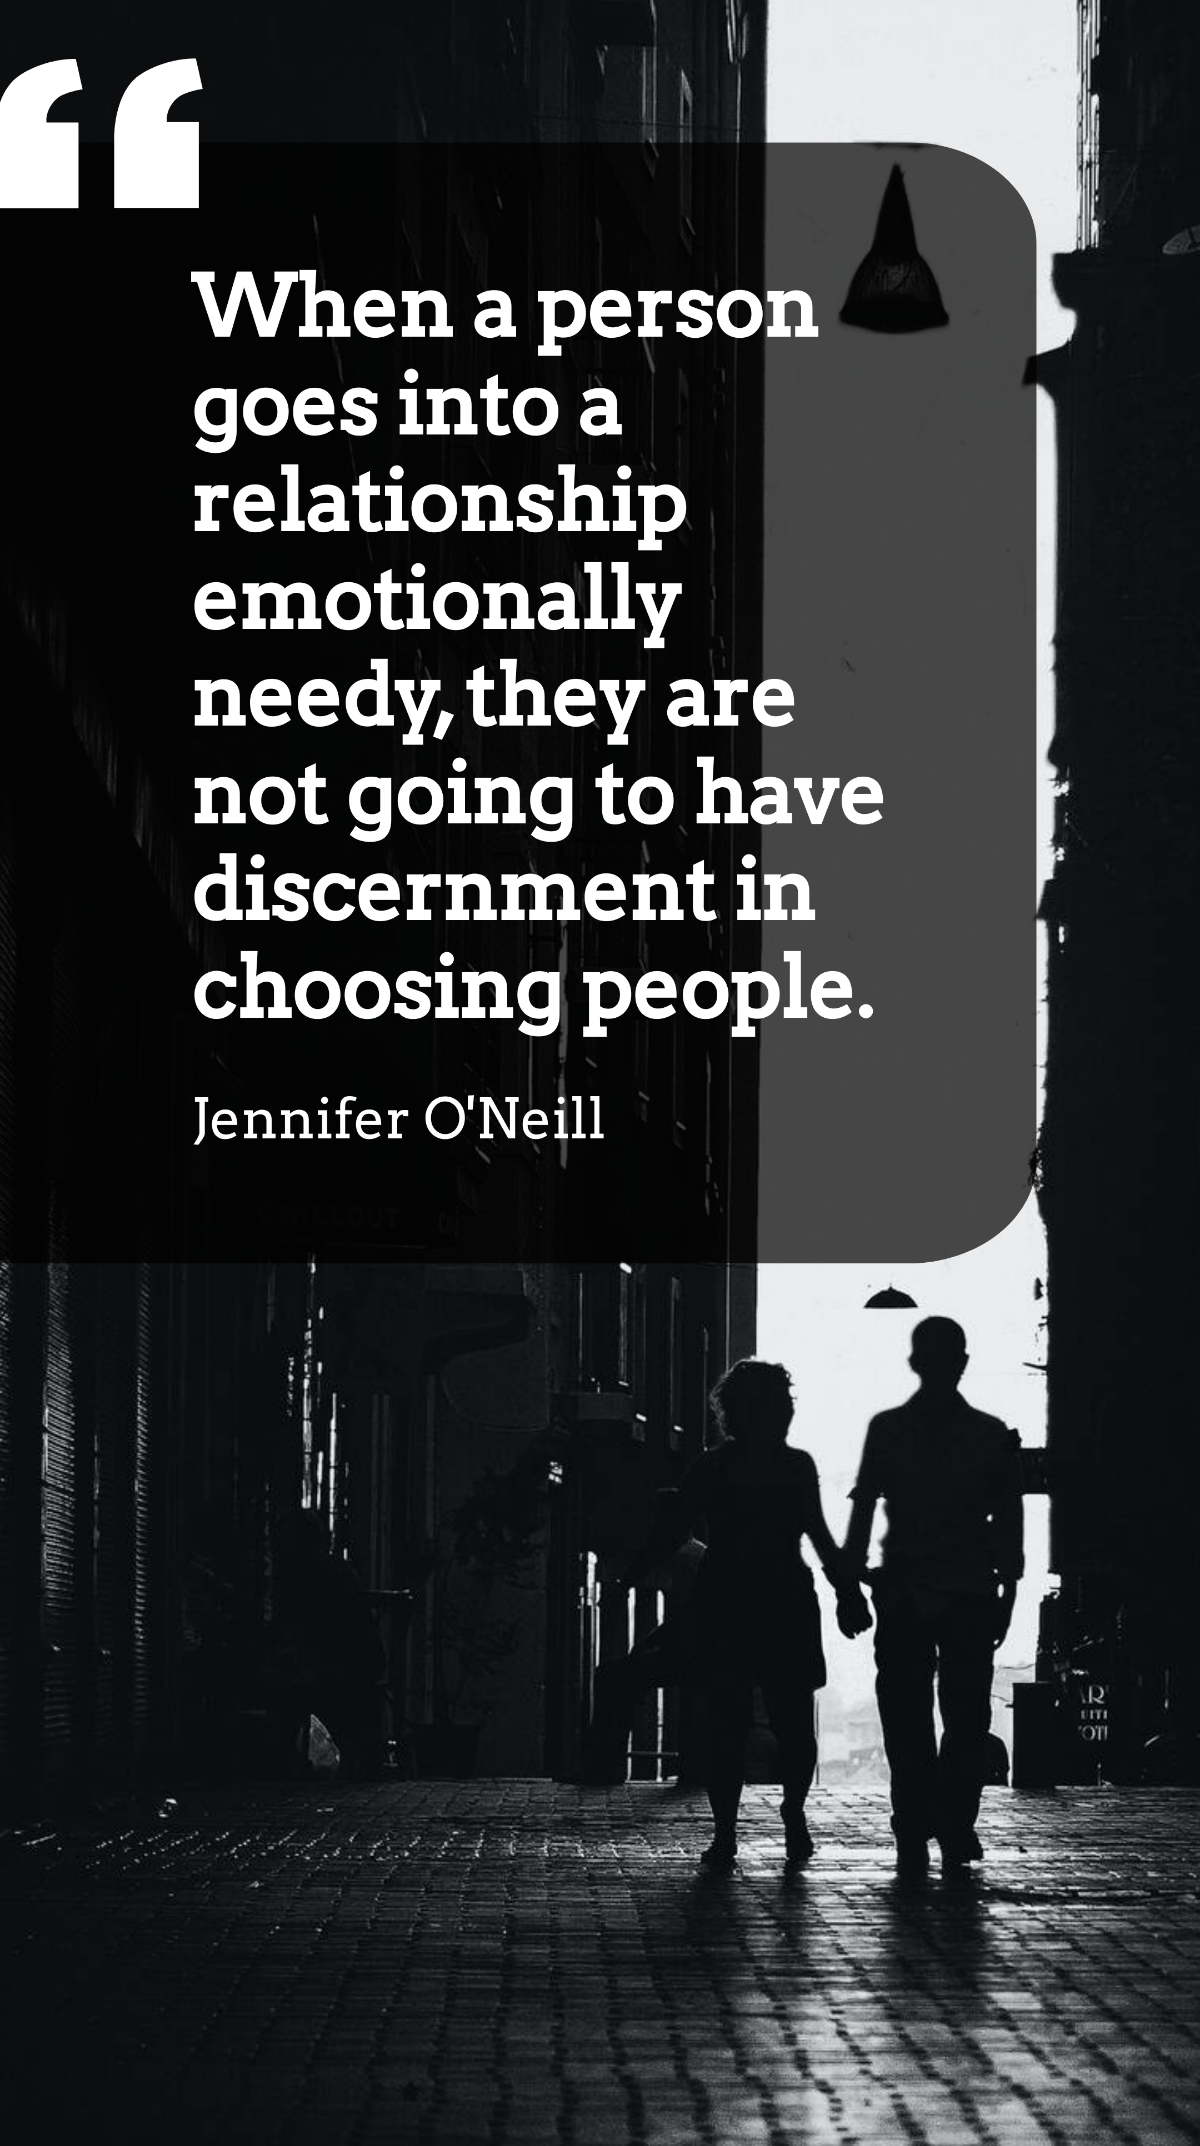 Jennifer O'Neill - When a person goes into a relationship emotionally needy, they are not going to have discernment in choosing people. Template